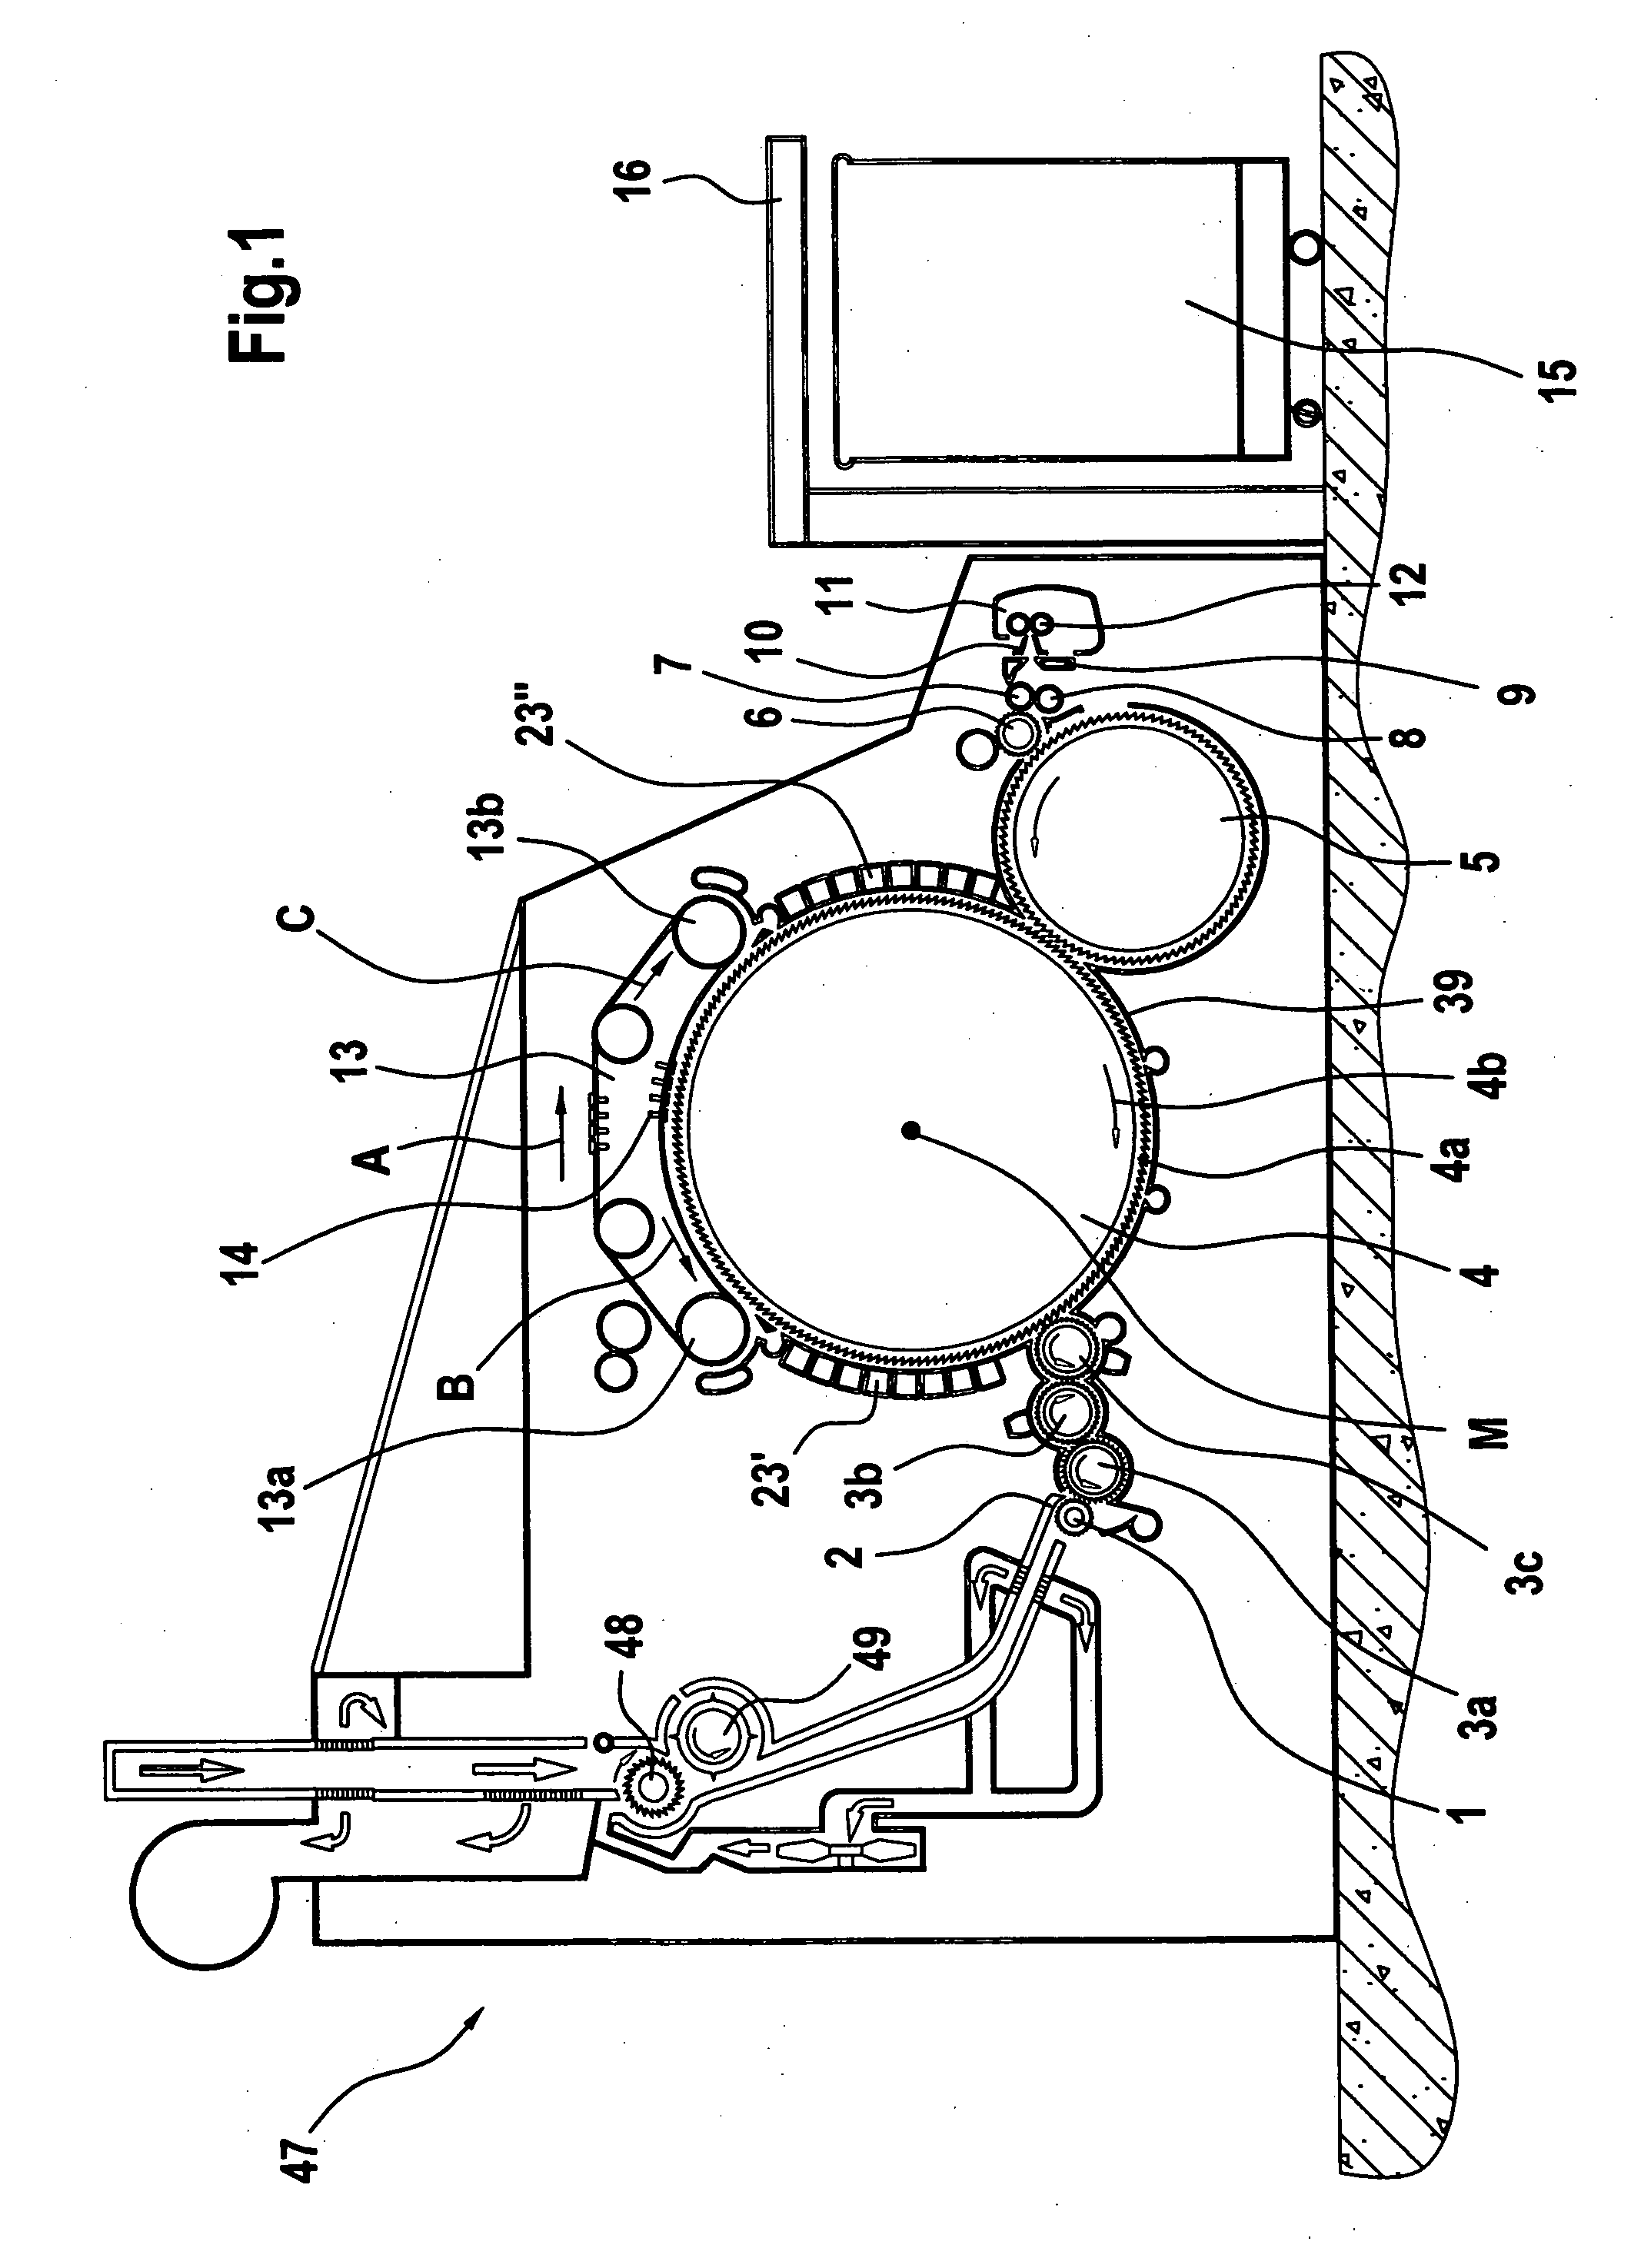 Roller for a fibre-processing machine, for example a spinning preparation machine